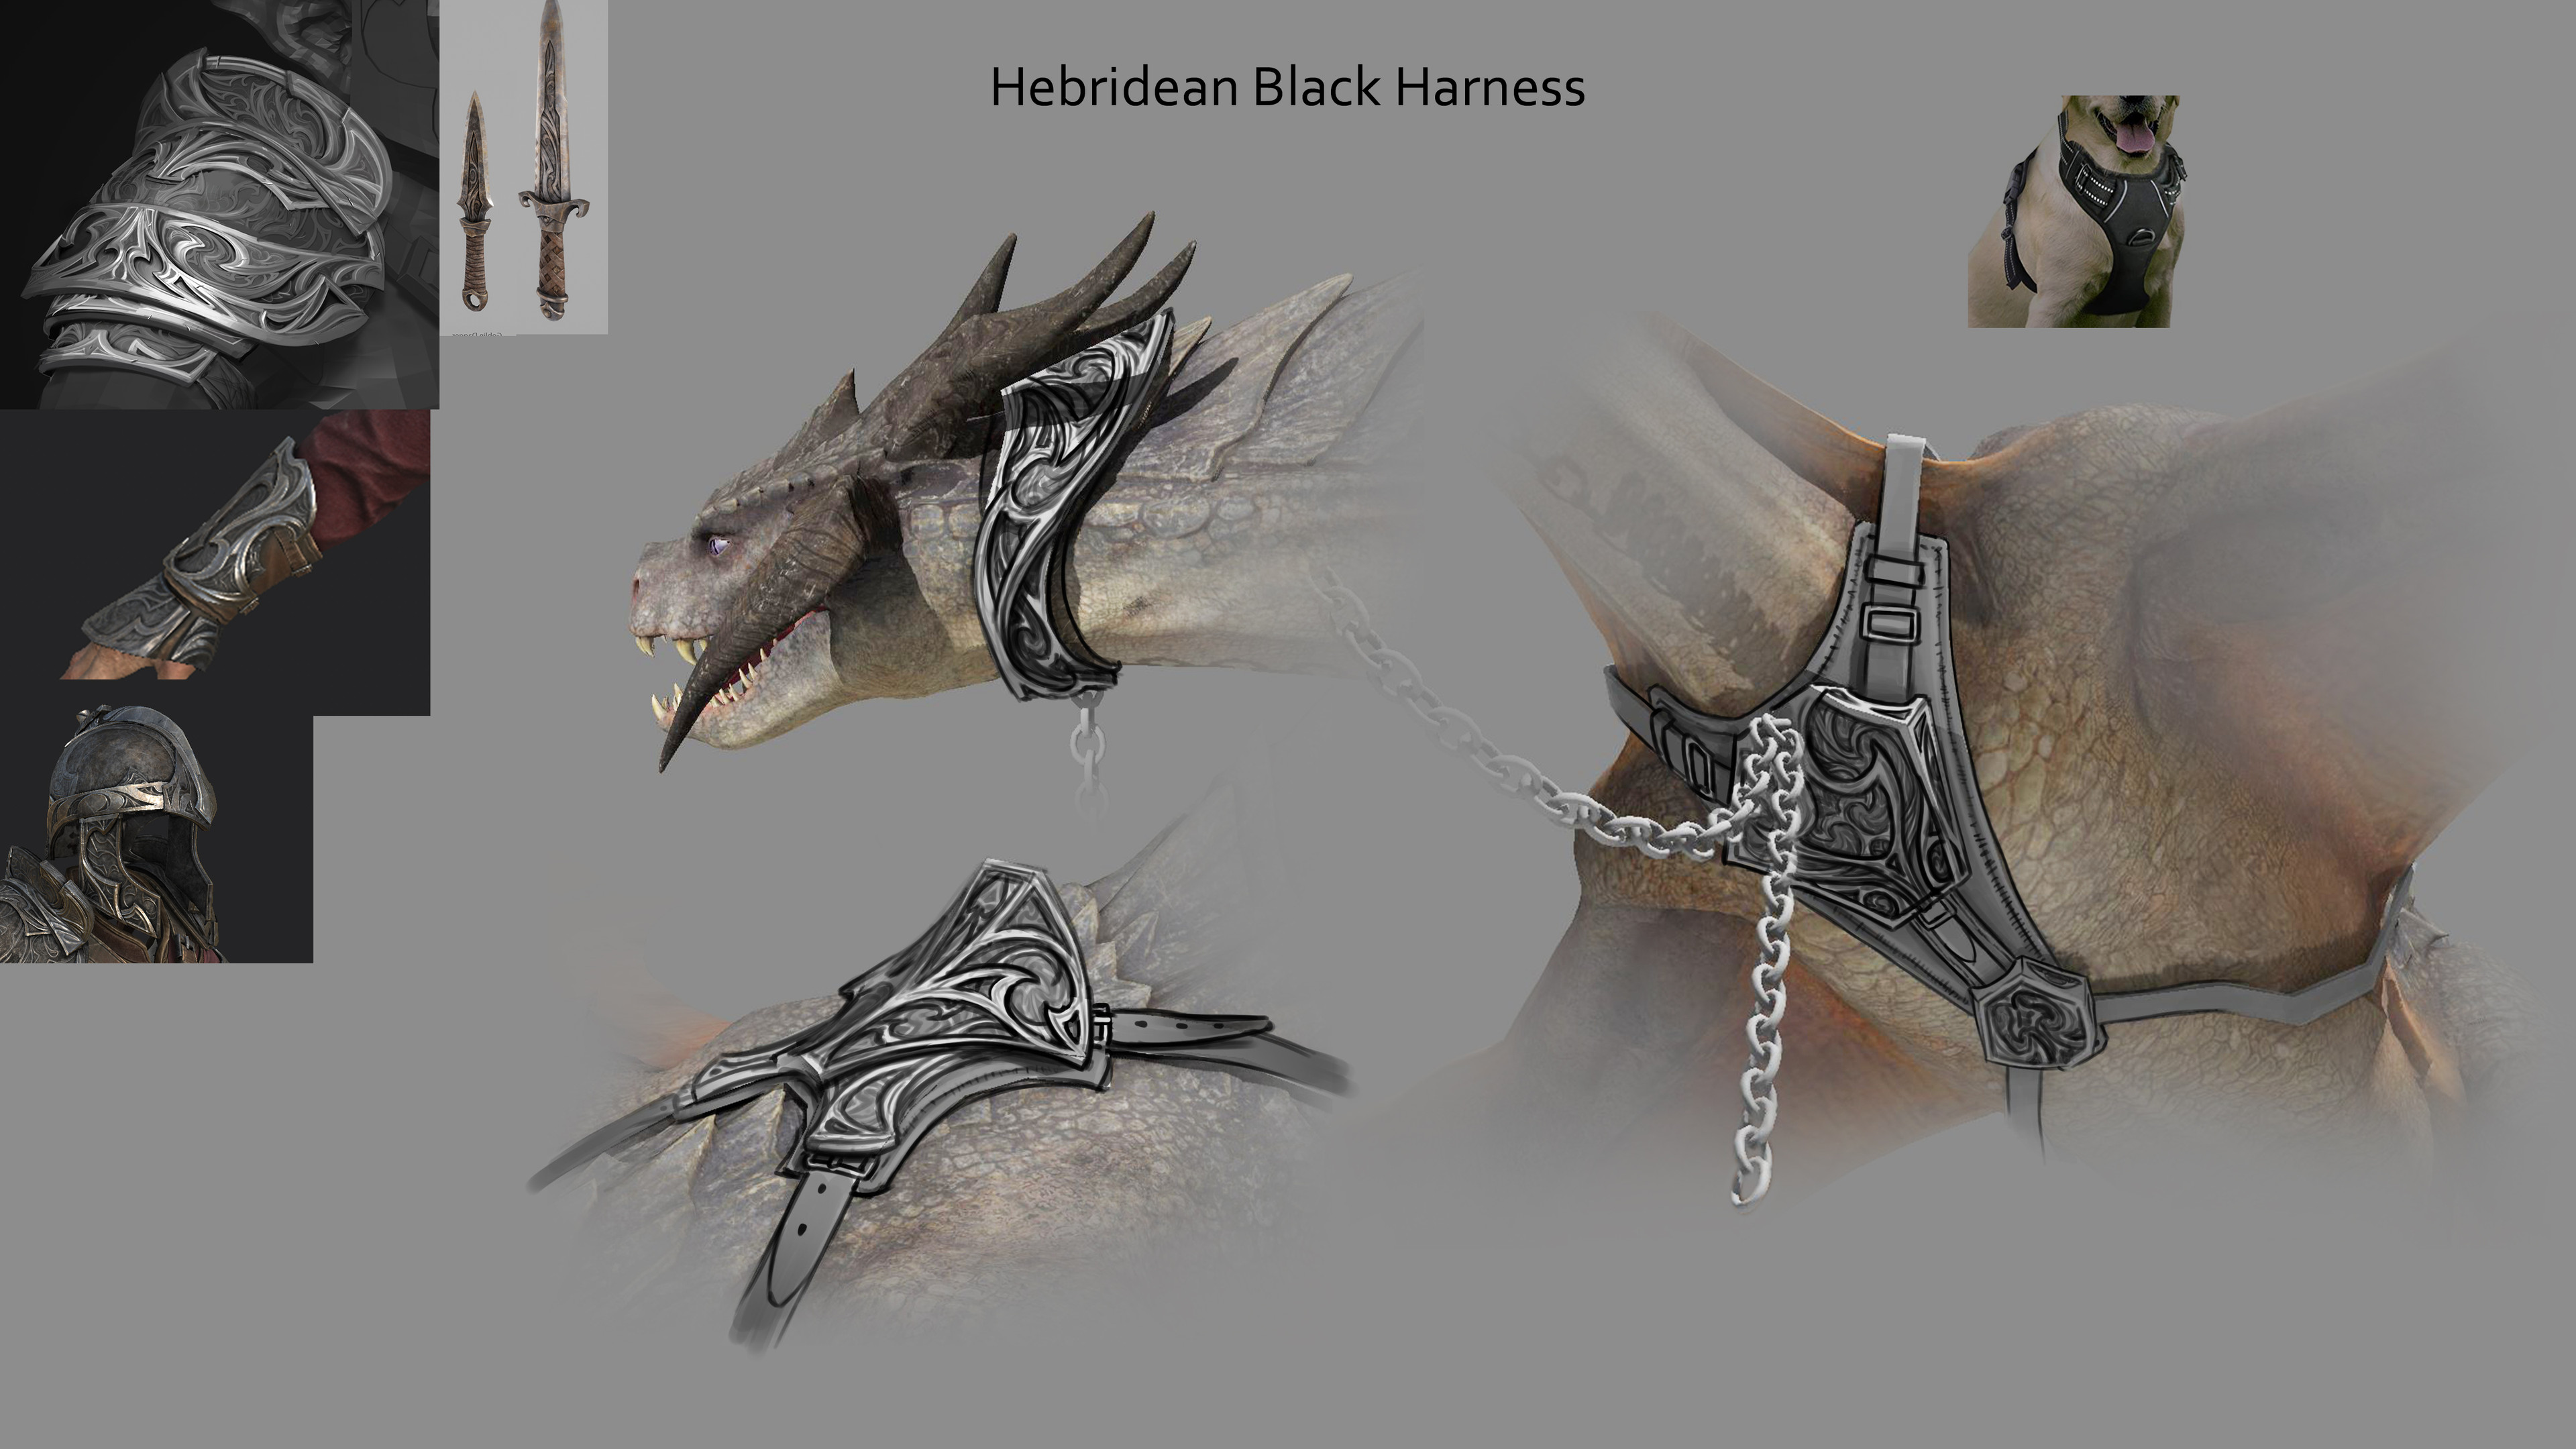 Concept for the harness and collar. While the collar is specifically called out in the game, we thought a harness and a chain would be a good way of making the dragon feel controlled.